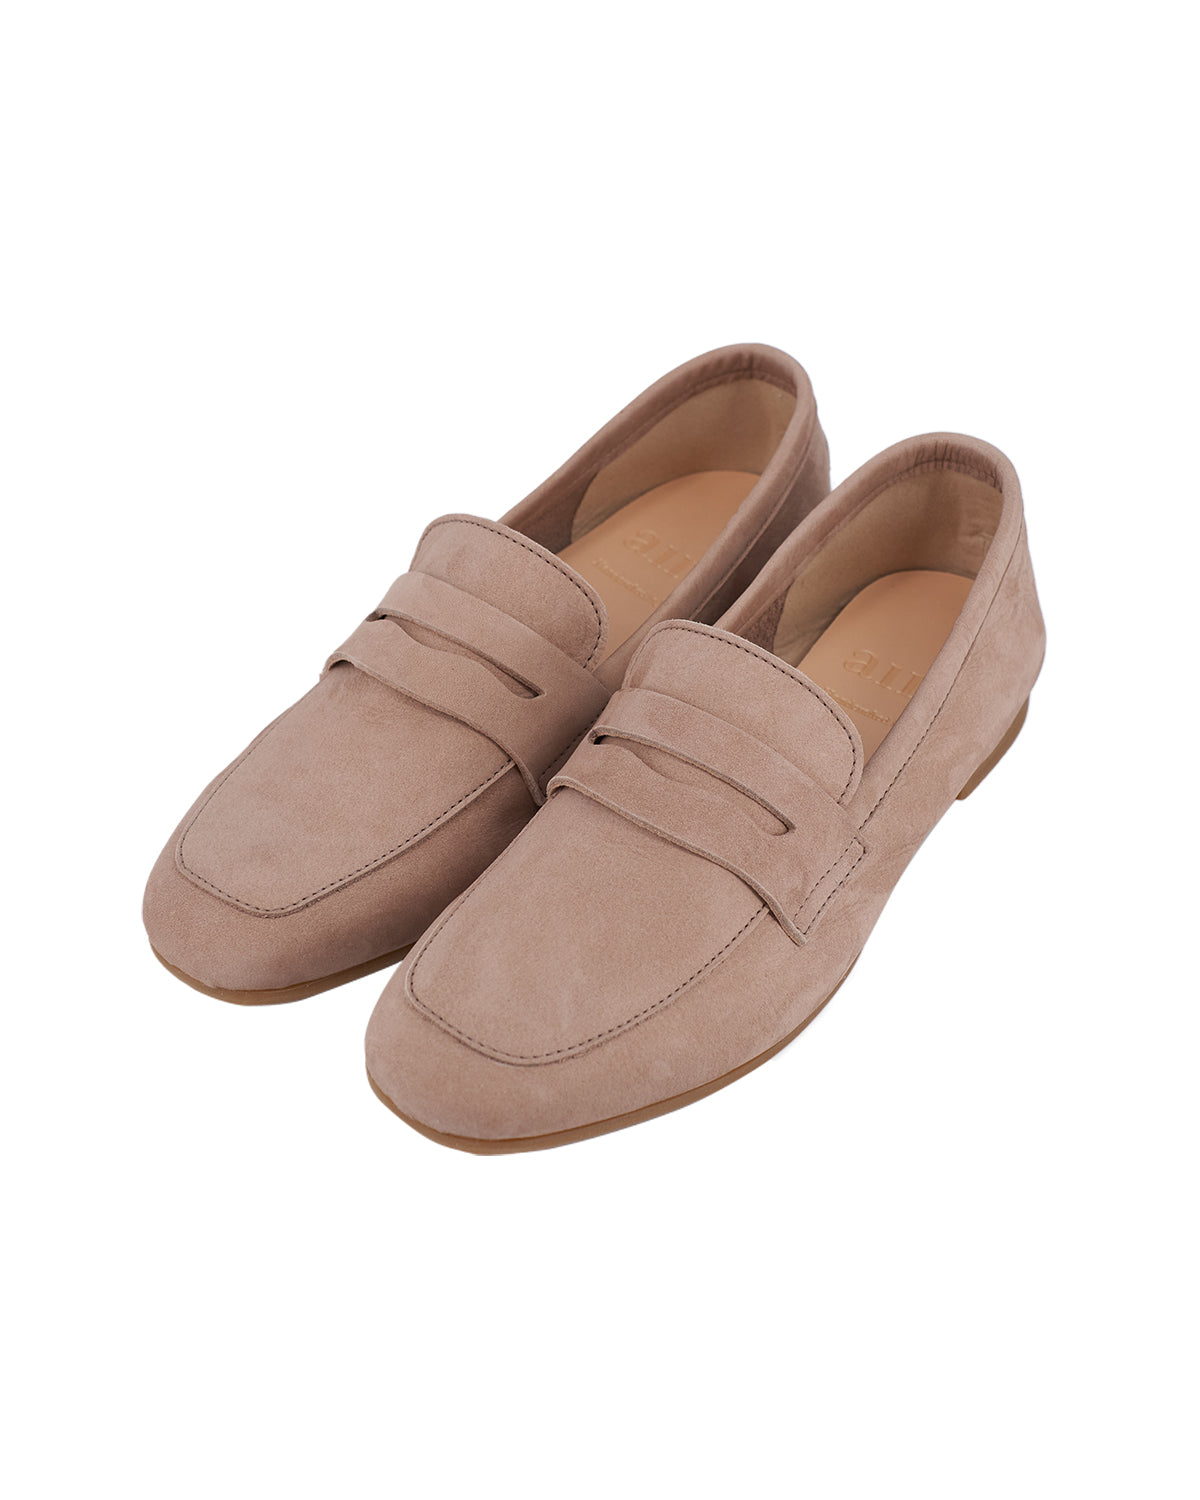 Thea Penny Loafers - Sand Beige